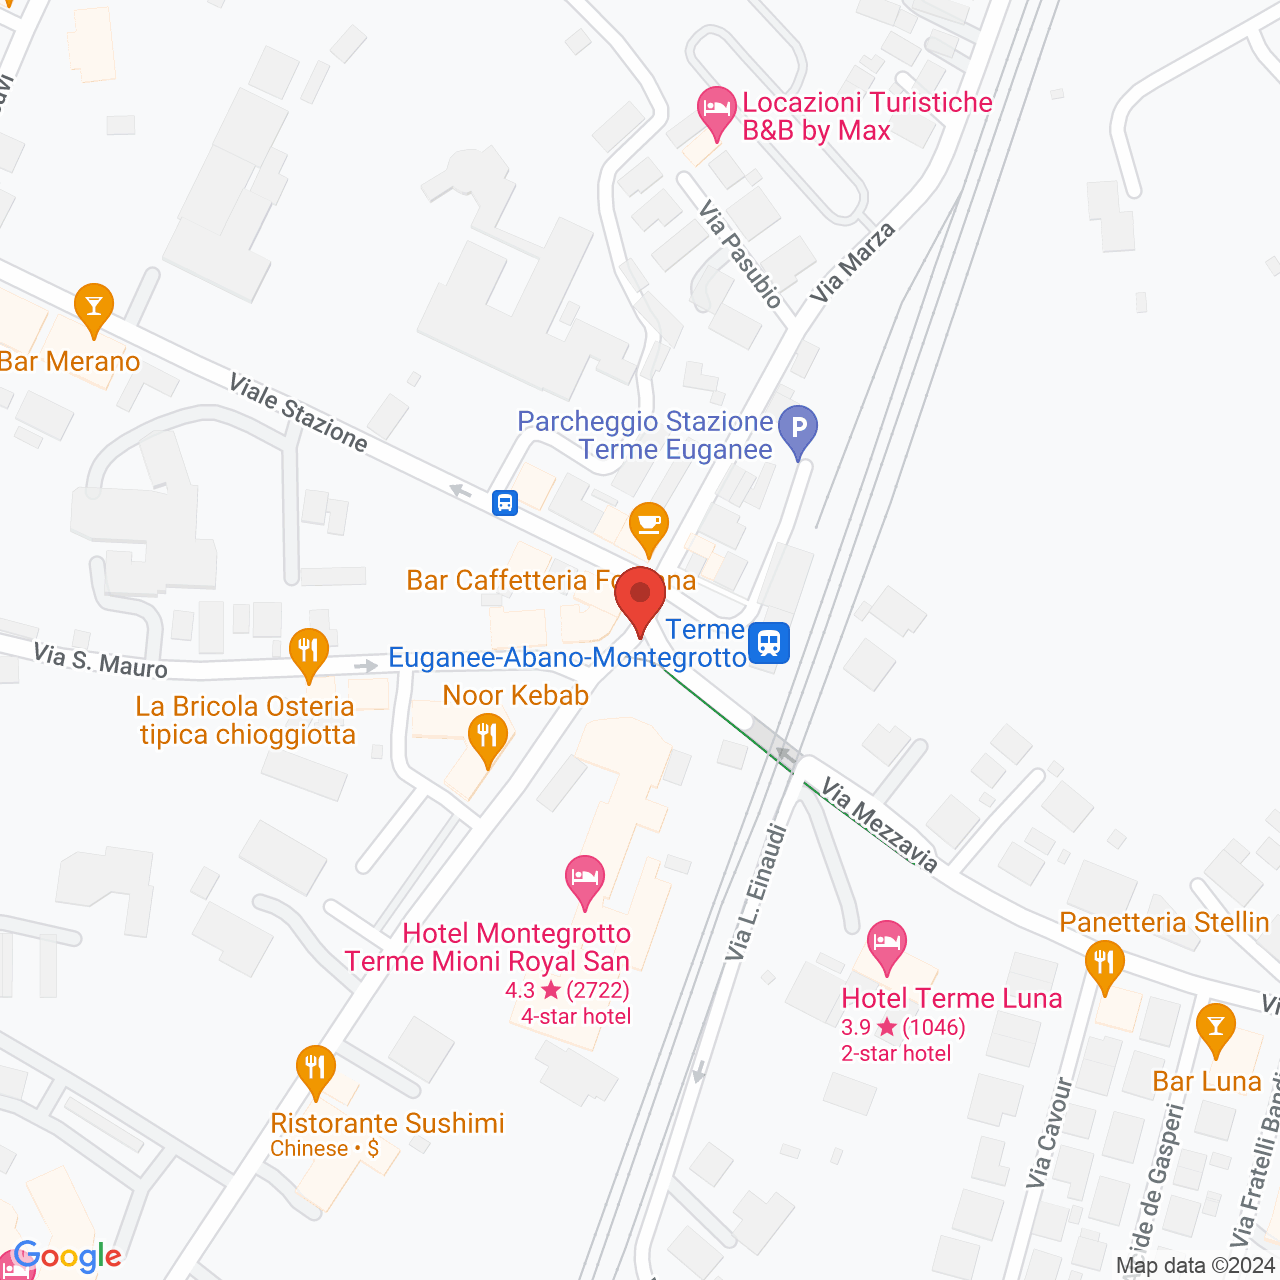 https://maps.googleapis.com/maps/api/staticmap?zoom=10&maptype=hybrid&scale=4&center=45.327408,11.7955778&markers=color:red%7C%7C45.327408,11.7955778&size=1000x1000&key=AIzaSyAQg6Liu52-a7wn17F9B-5c4QmJ9kTO3Mo